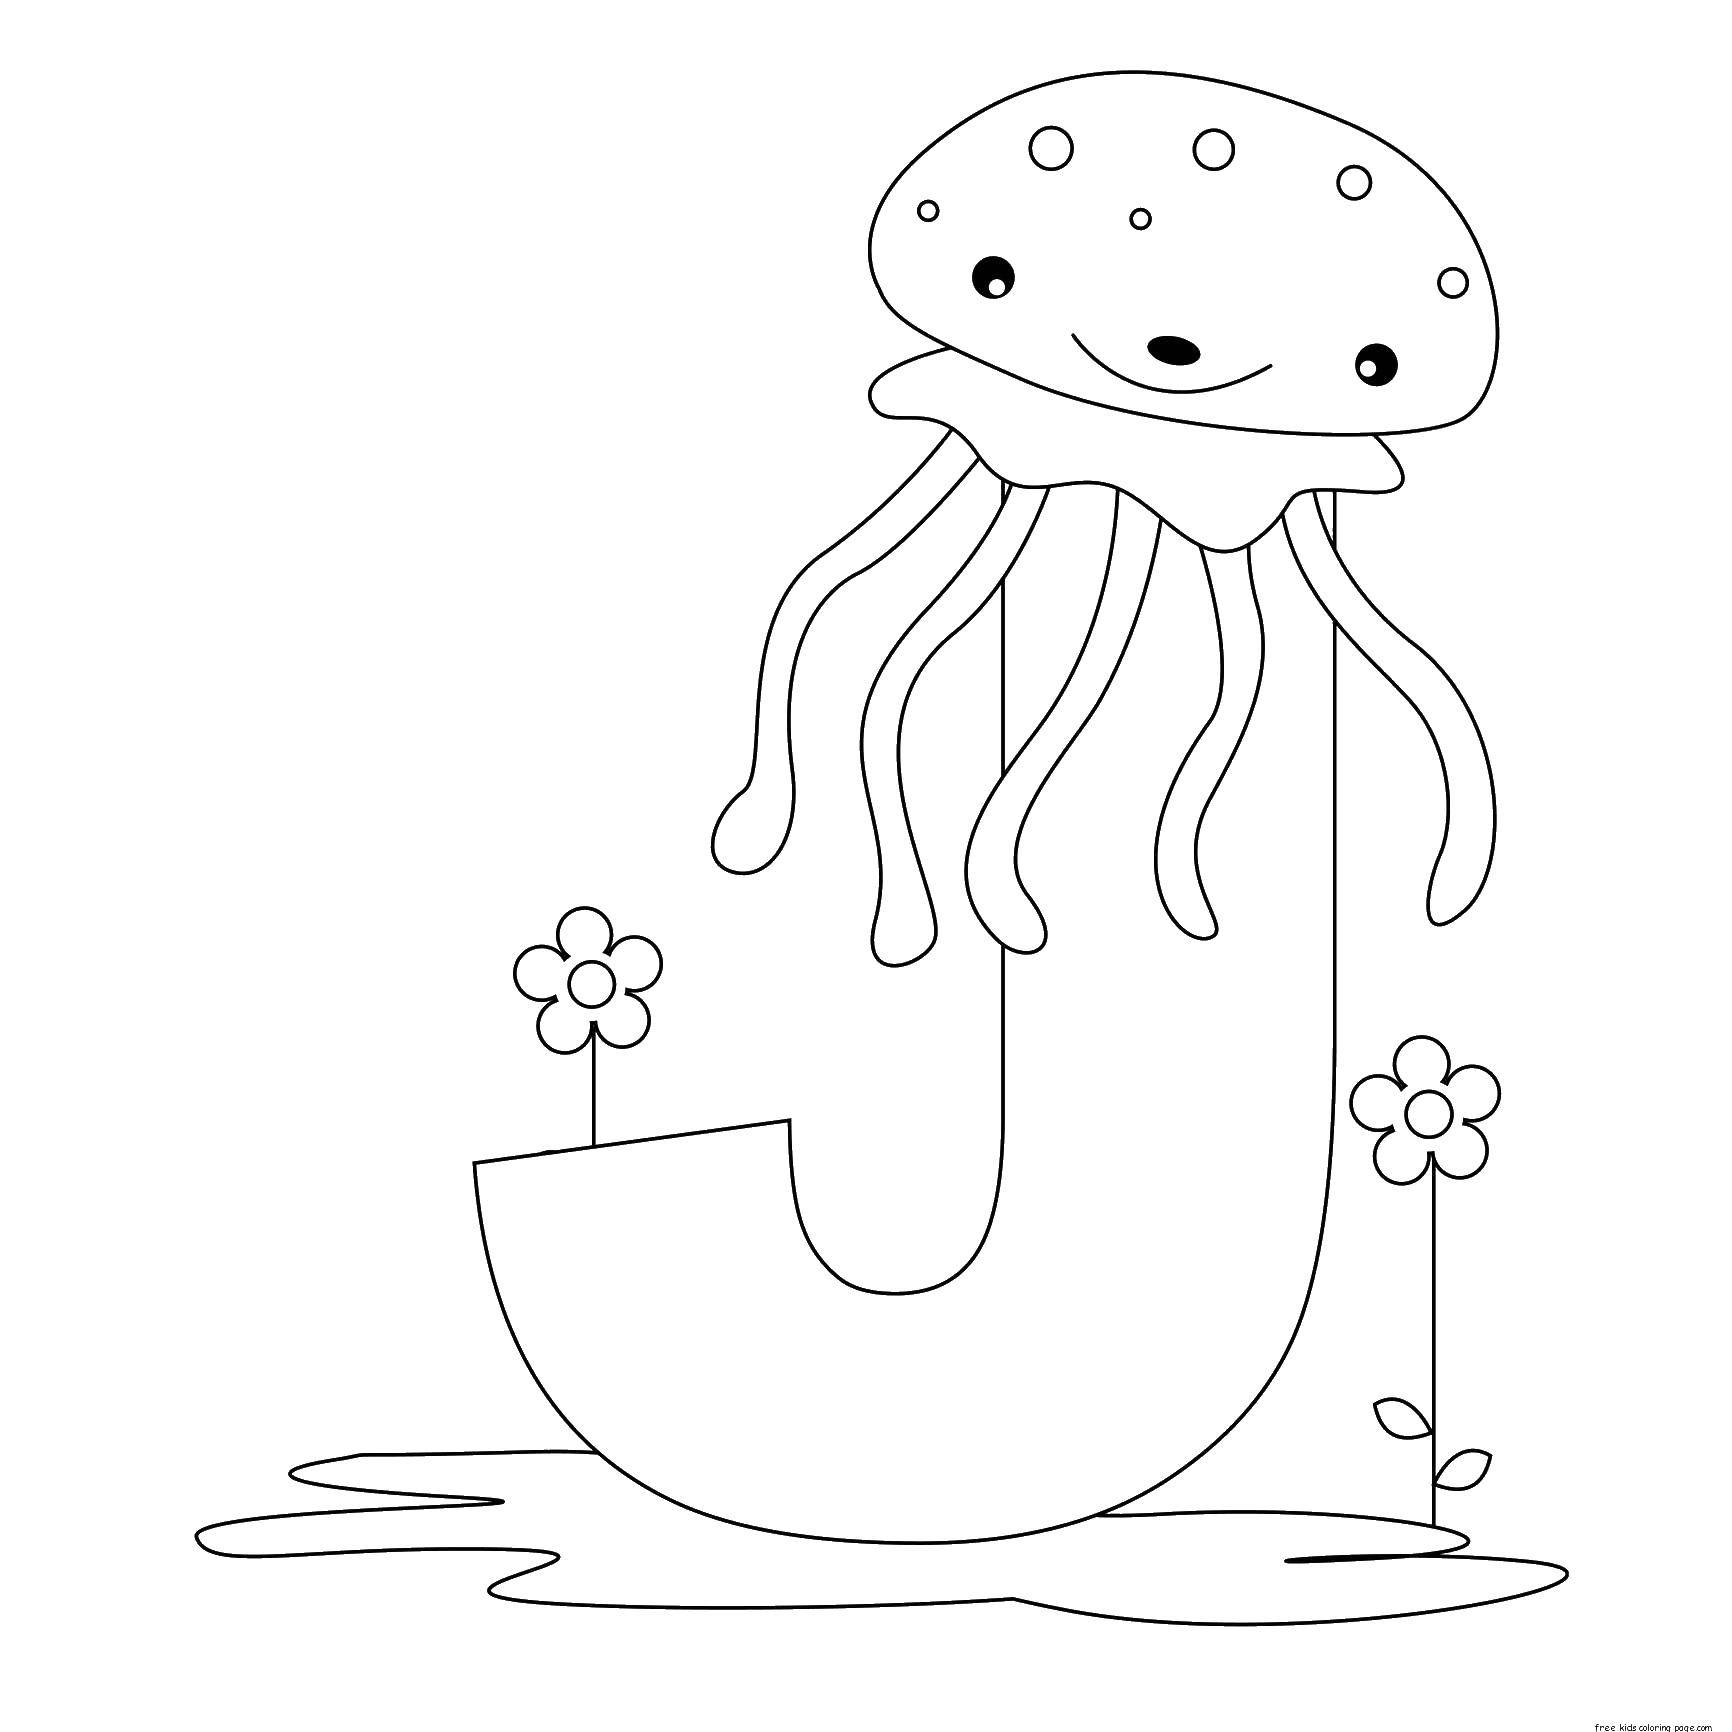 Coloring Medusa is the letter m. Category Sea animals. Tags:  Underwater world, jellyfish.